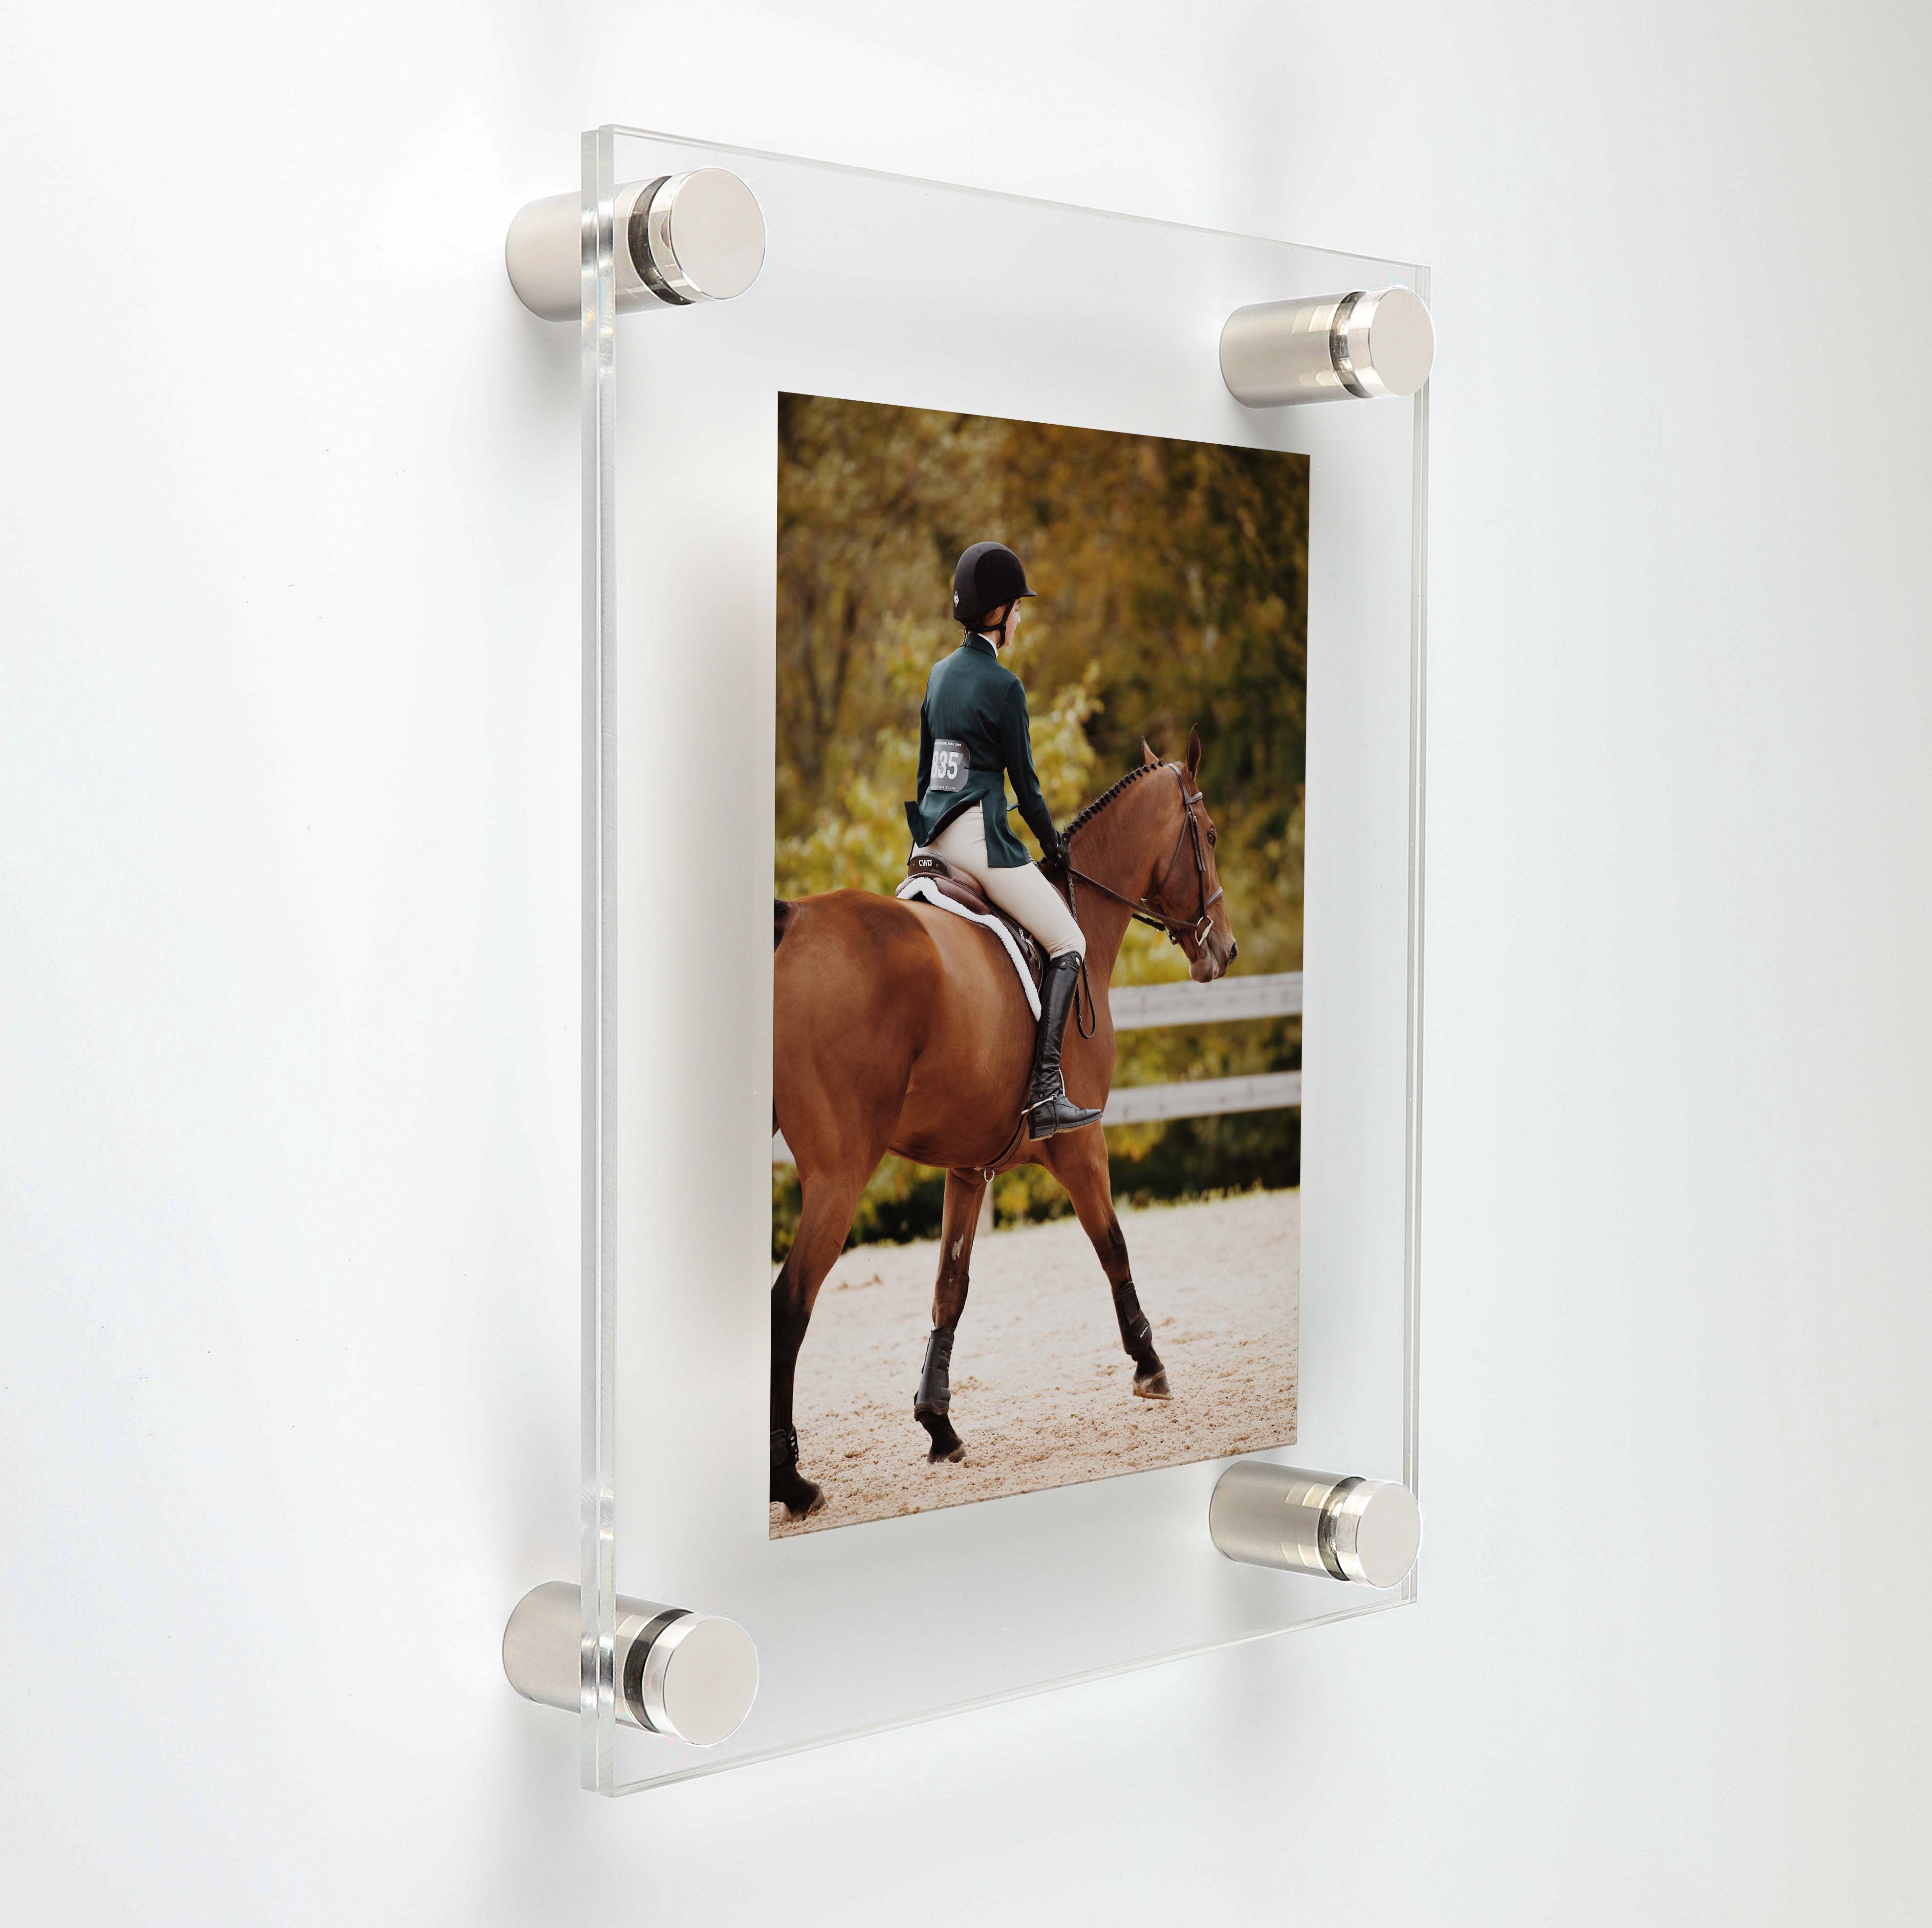 (2) 27'' x 39'' Clear Acrylics , Pre-Drilled With Polished Edges (Thick 3/16'' each), Wall Frame with (6) 1'' x 1'' Polished Stainless Steel Standoffs includes Screws and Anchors